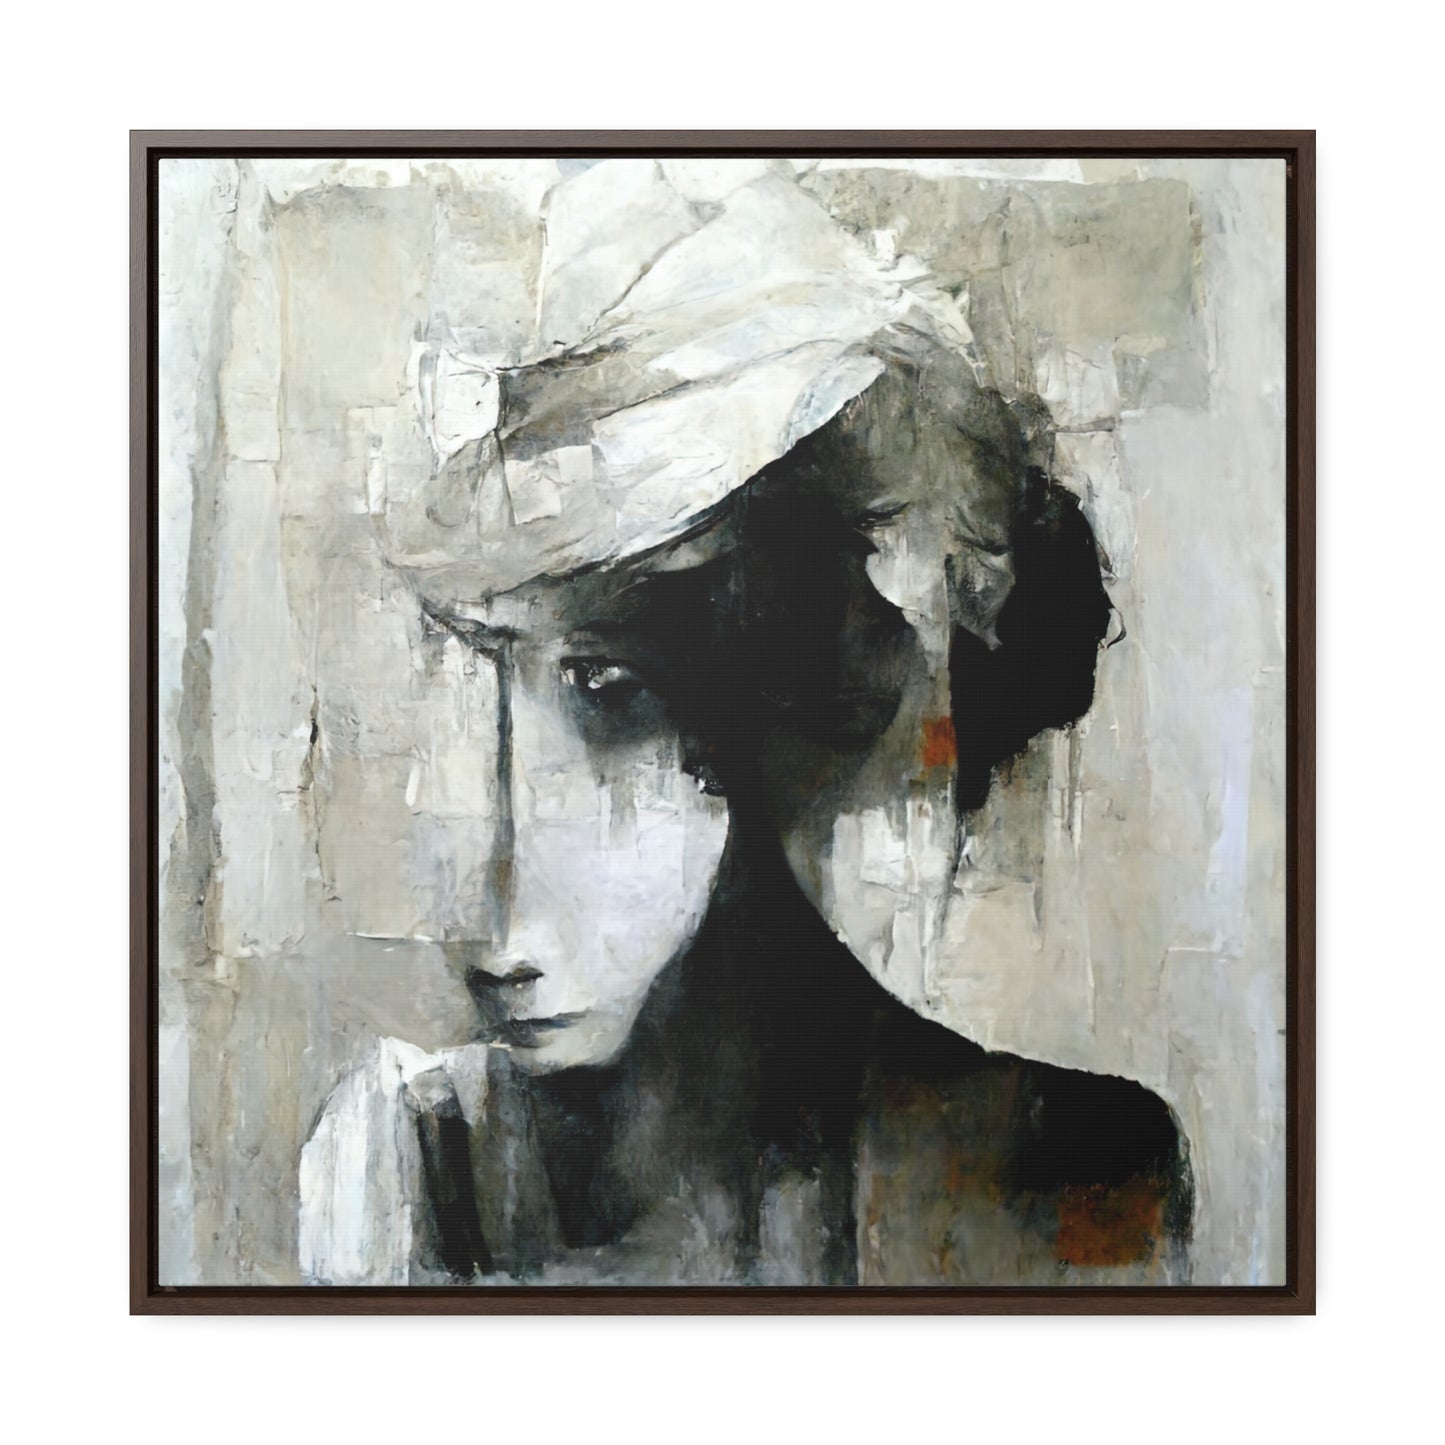 Forgotten face 2, Valentinii, Gallery Canvas Wraps, Square Frame